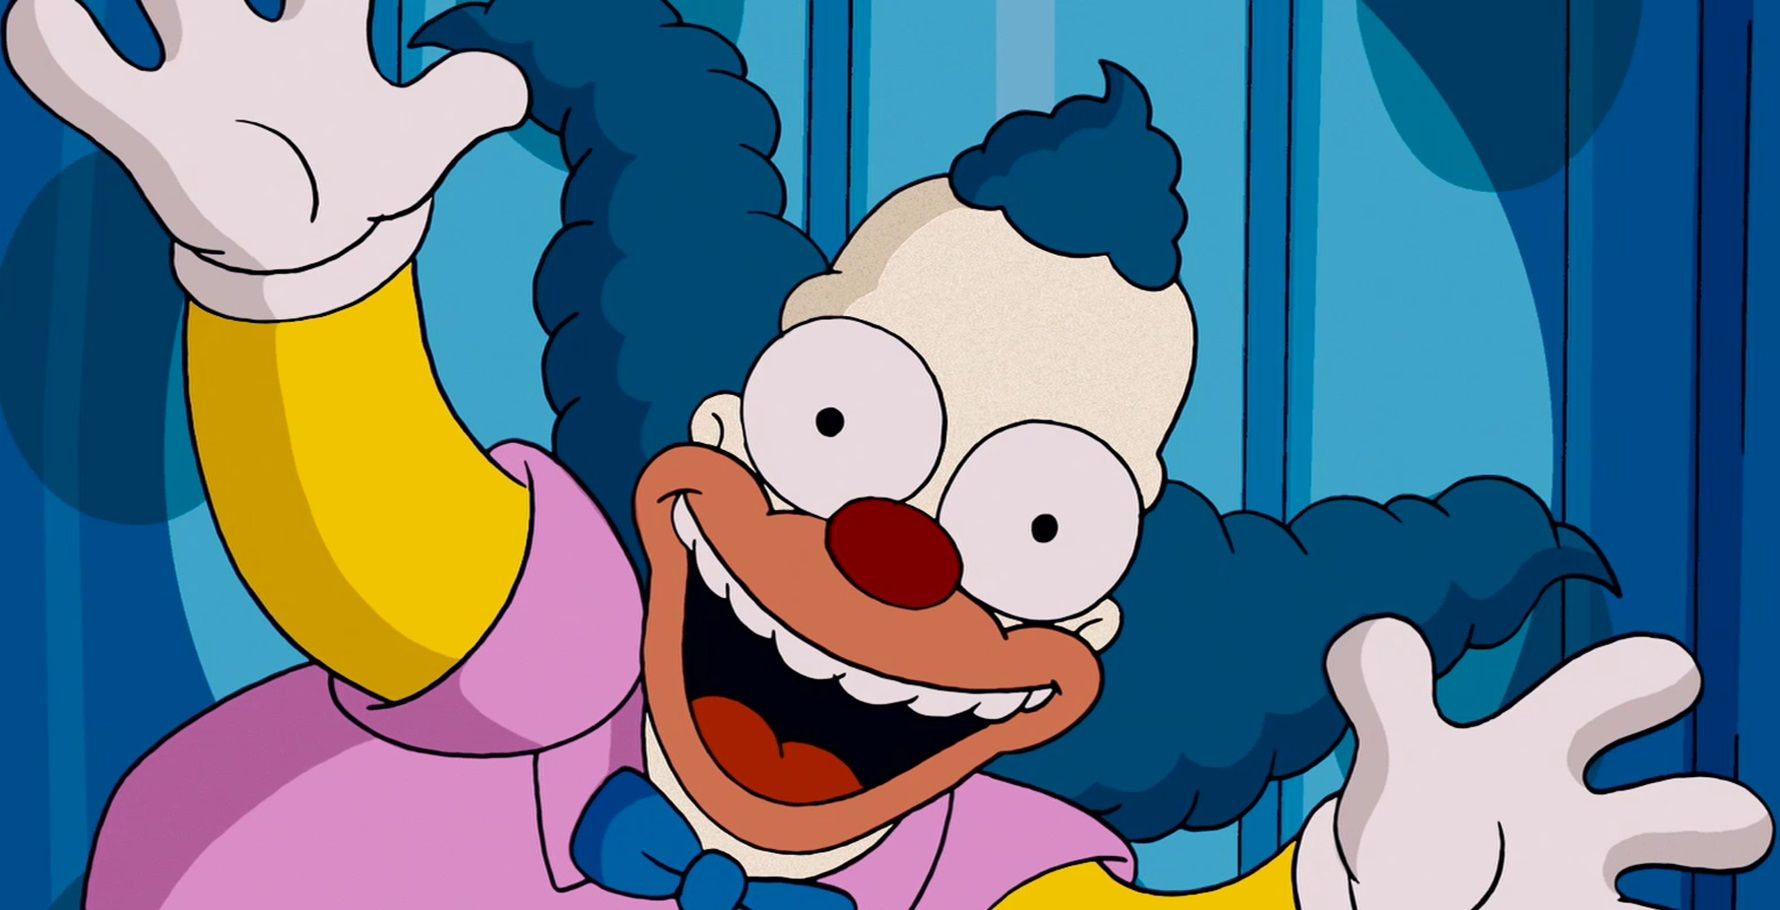 The Simpsons 10 Funniest Krusty Clown Quotes ScreenRant.